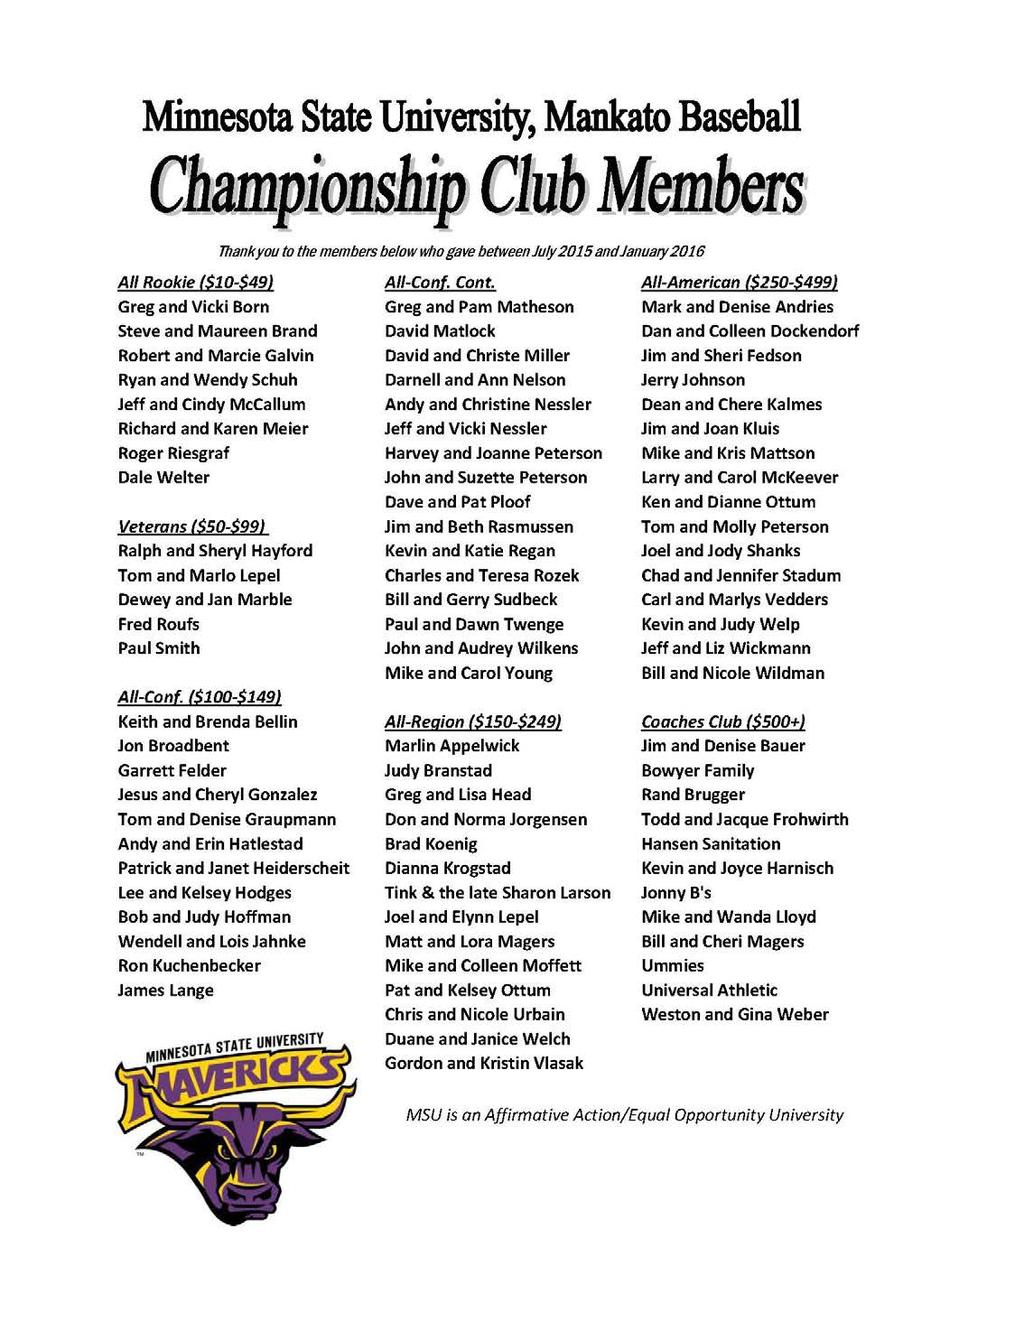 CHAMPIONSHIP CLUB The Championship Club is the chief fundraising function for the Minnesota State University, Mankato baseball team.